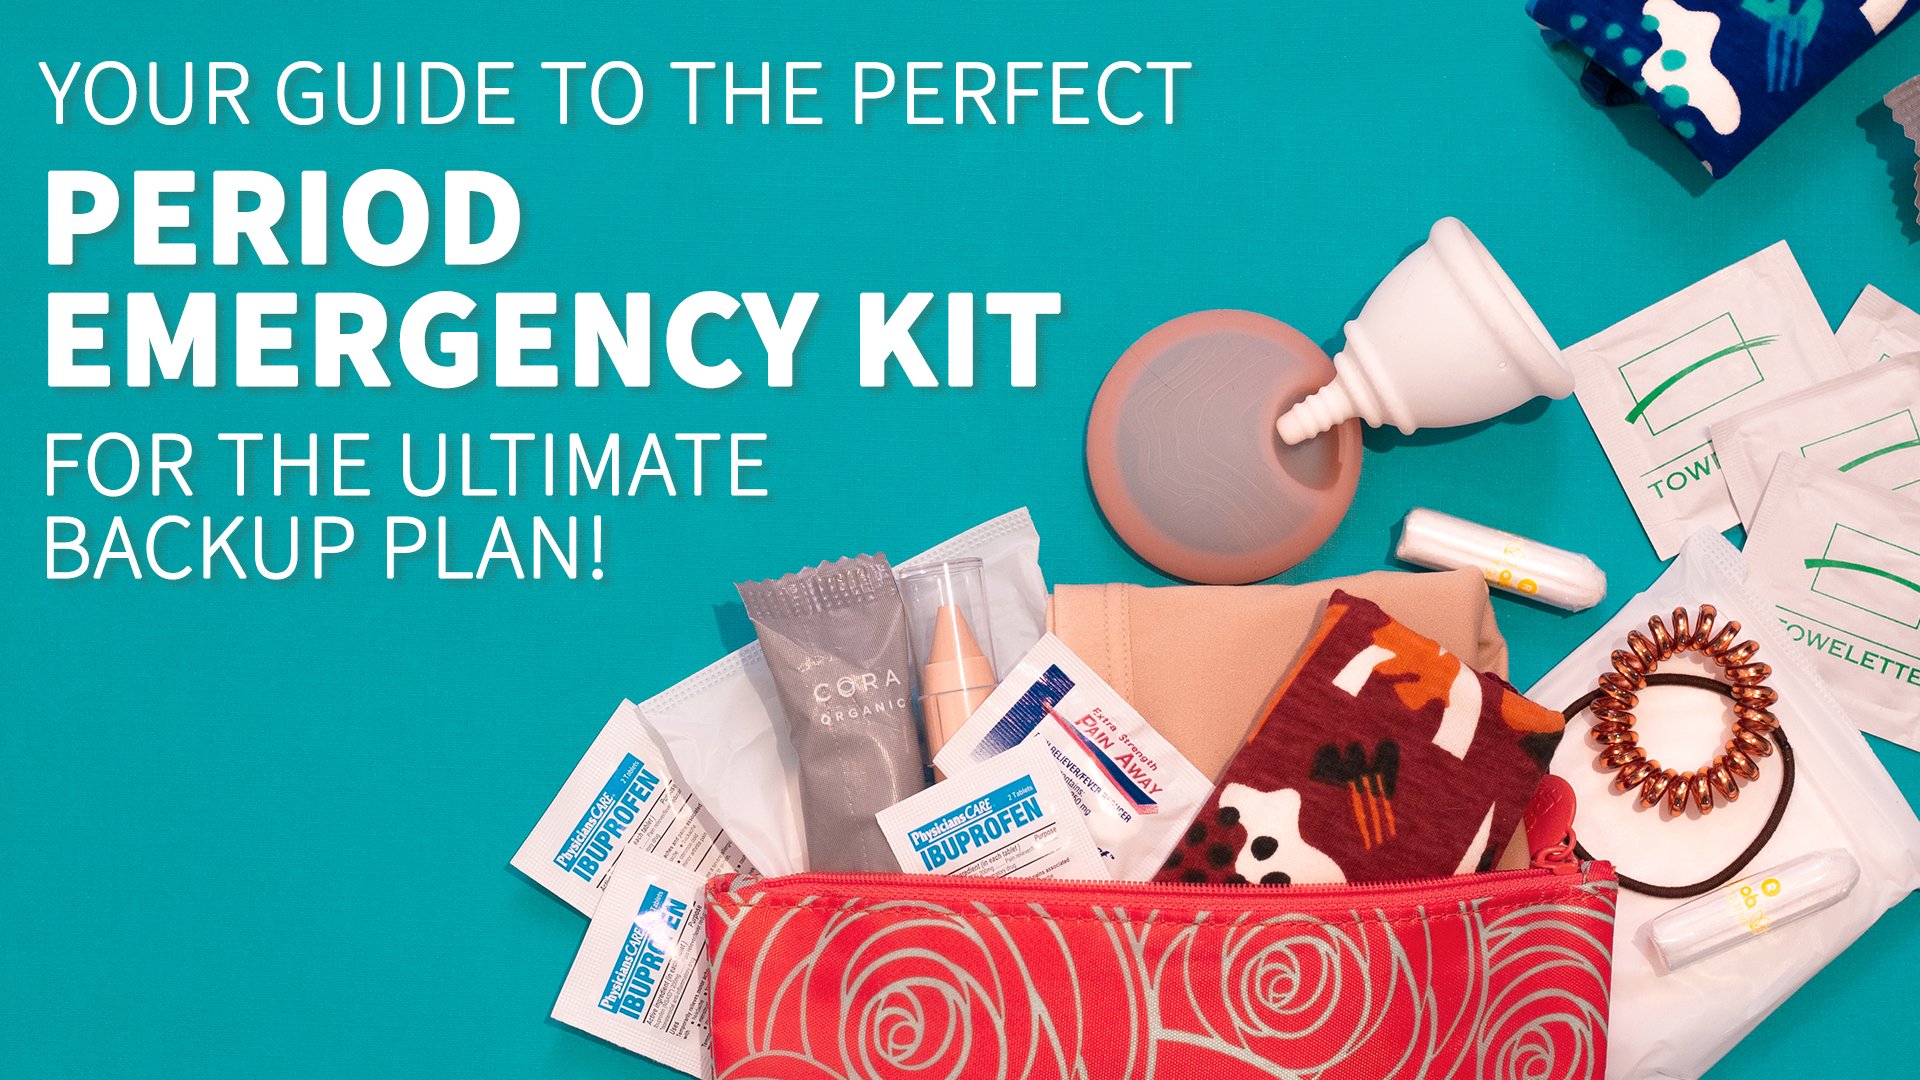 https://putacupinit.com/wp-content/uploads/2023/01/Your-Guide-To-A-Period-Emergency-Kit-by-Put-A-Cup-In-It.jpg